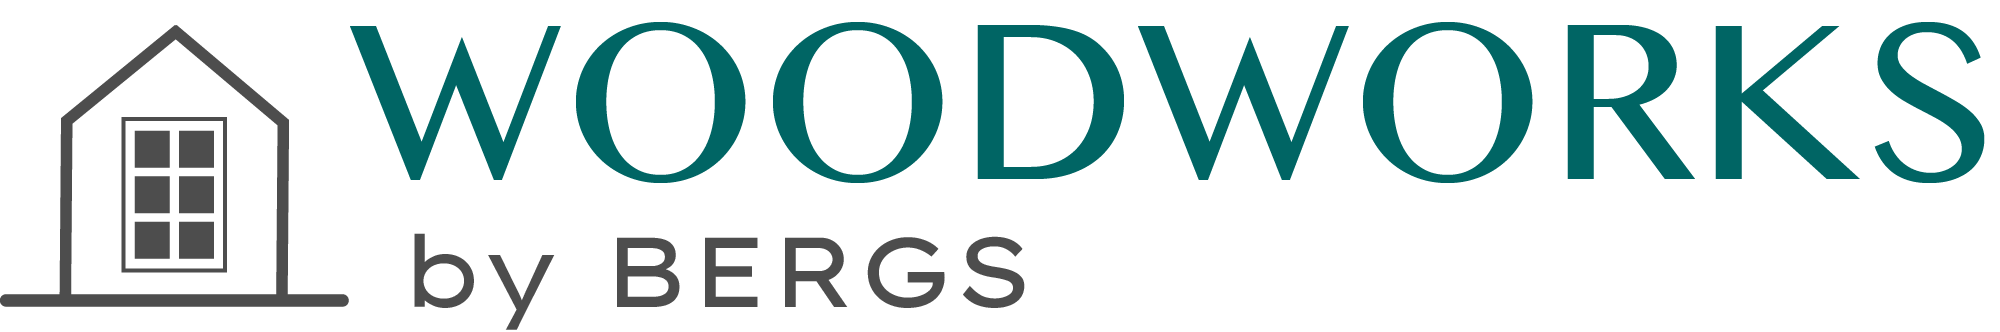 Woodworks by Bergs logo